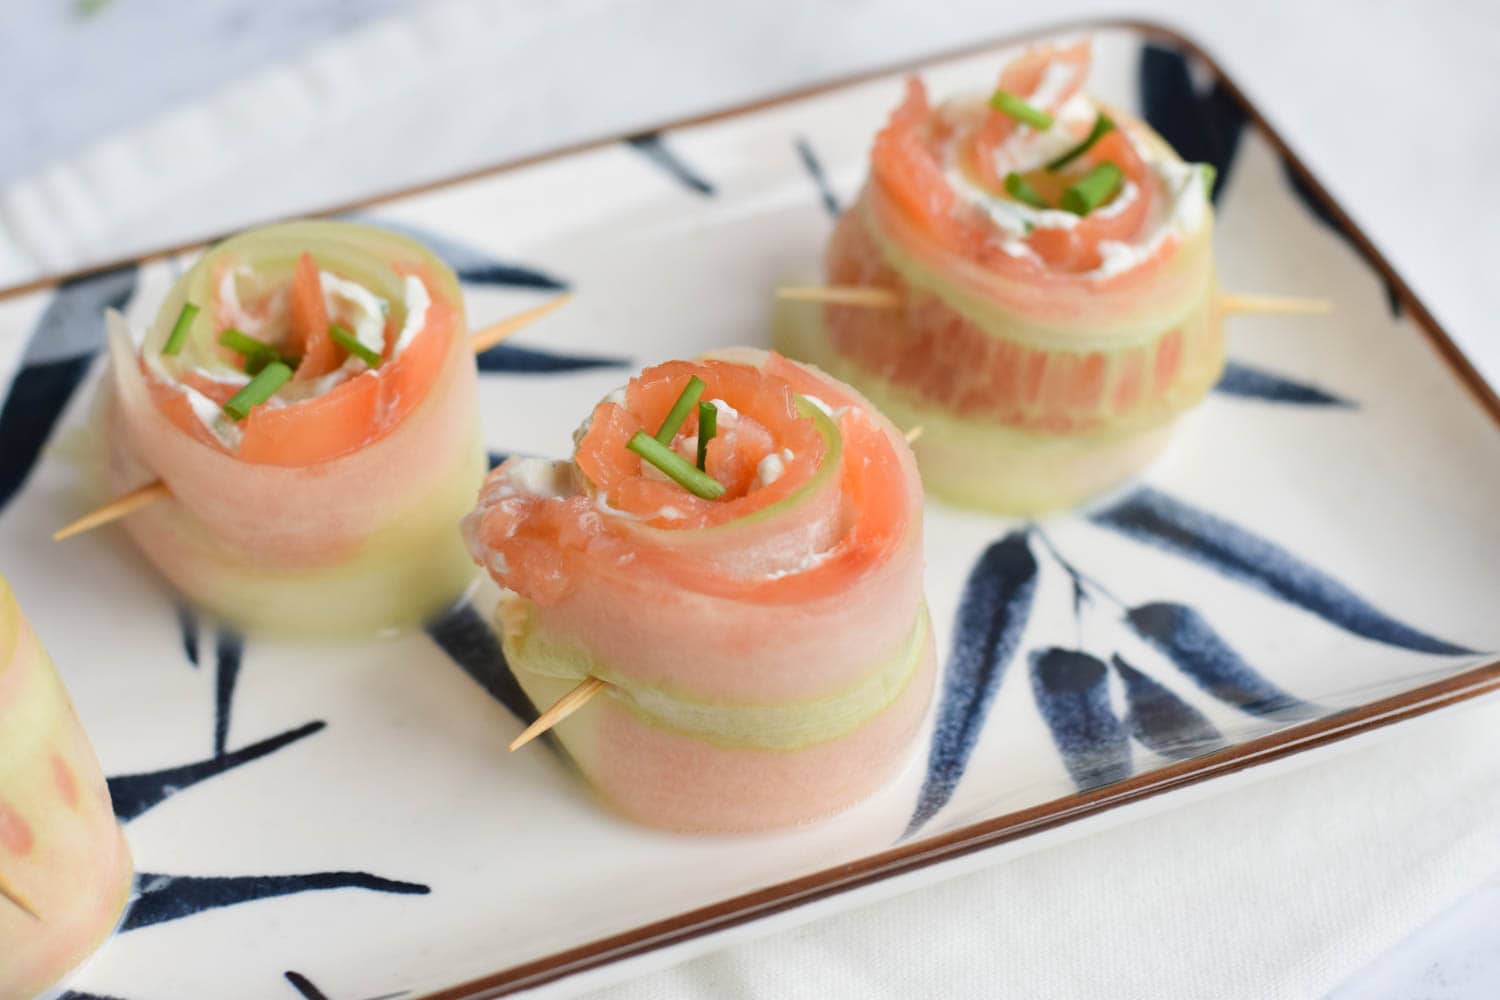 Low FODMAP smoked salmon and cucumber rolls with cream cheese and dill held together by a toothpick